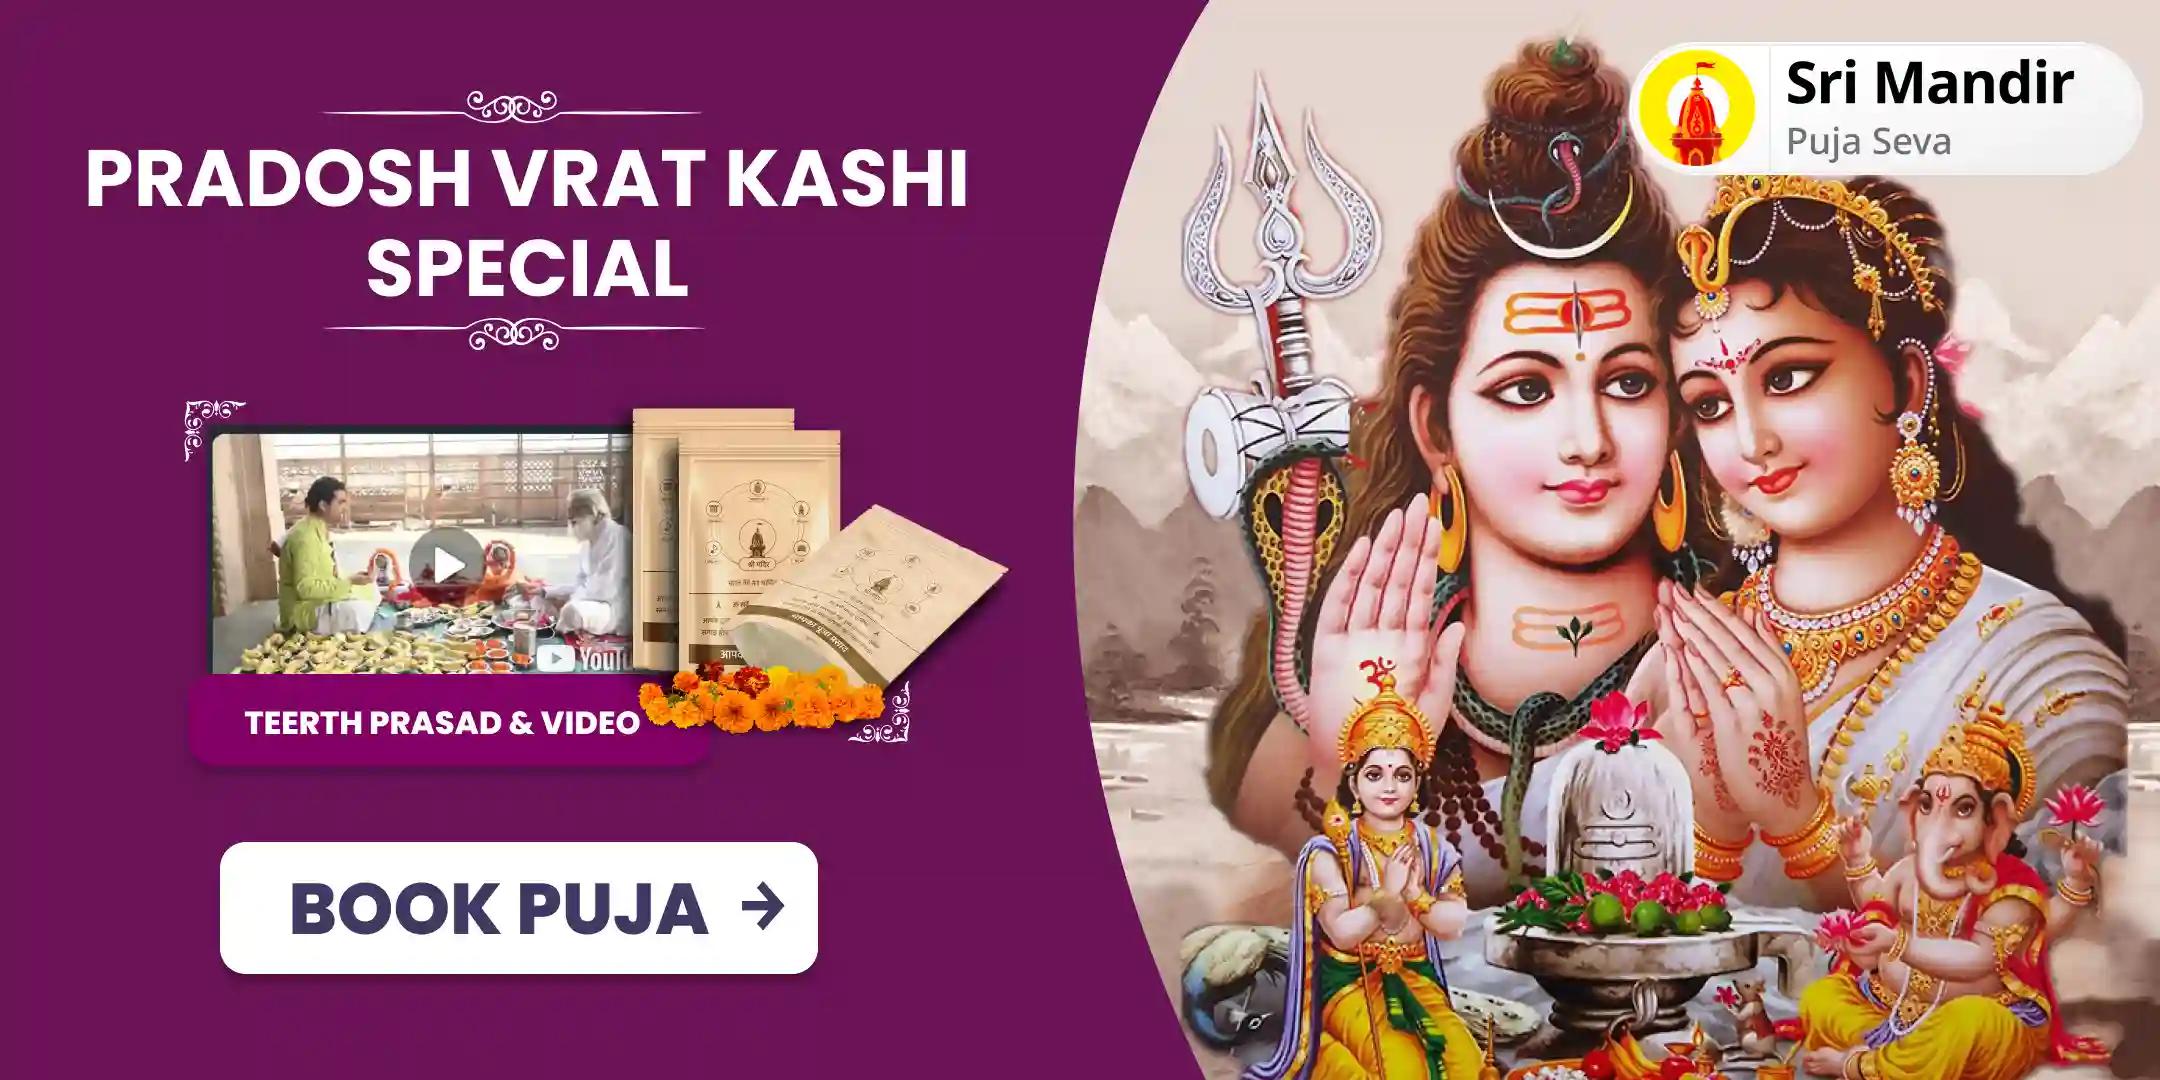 Pradosh Vrat Special Gauri-Shankar Puja and Shiv-Gauri Stotra Path To Resolve Conflicts and Achieve Bliss in Relationship